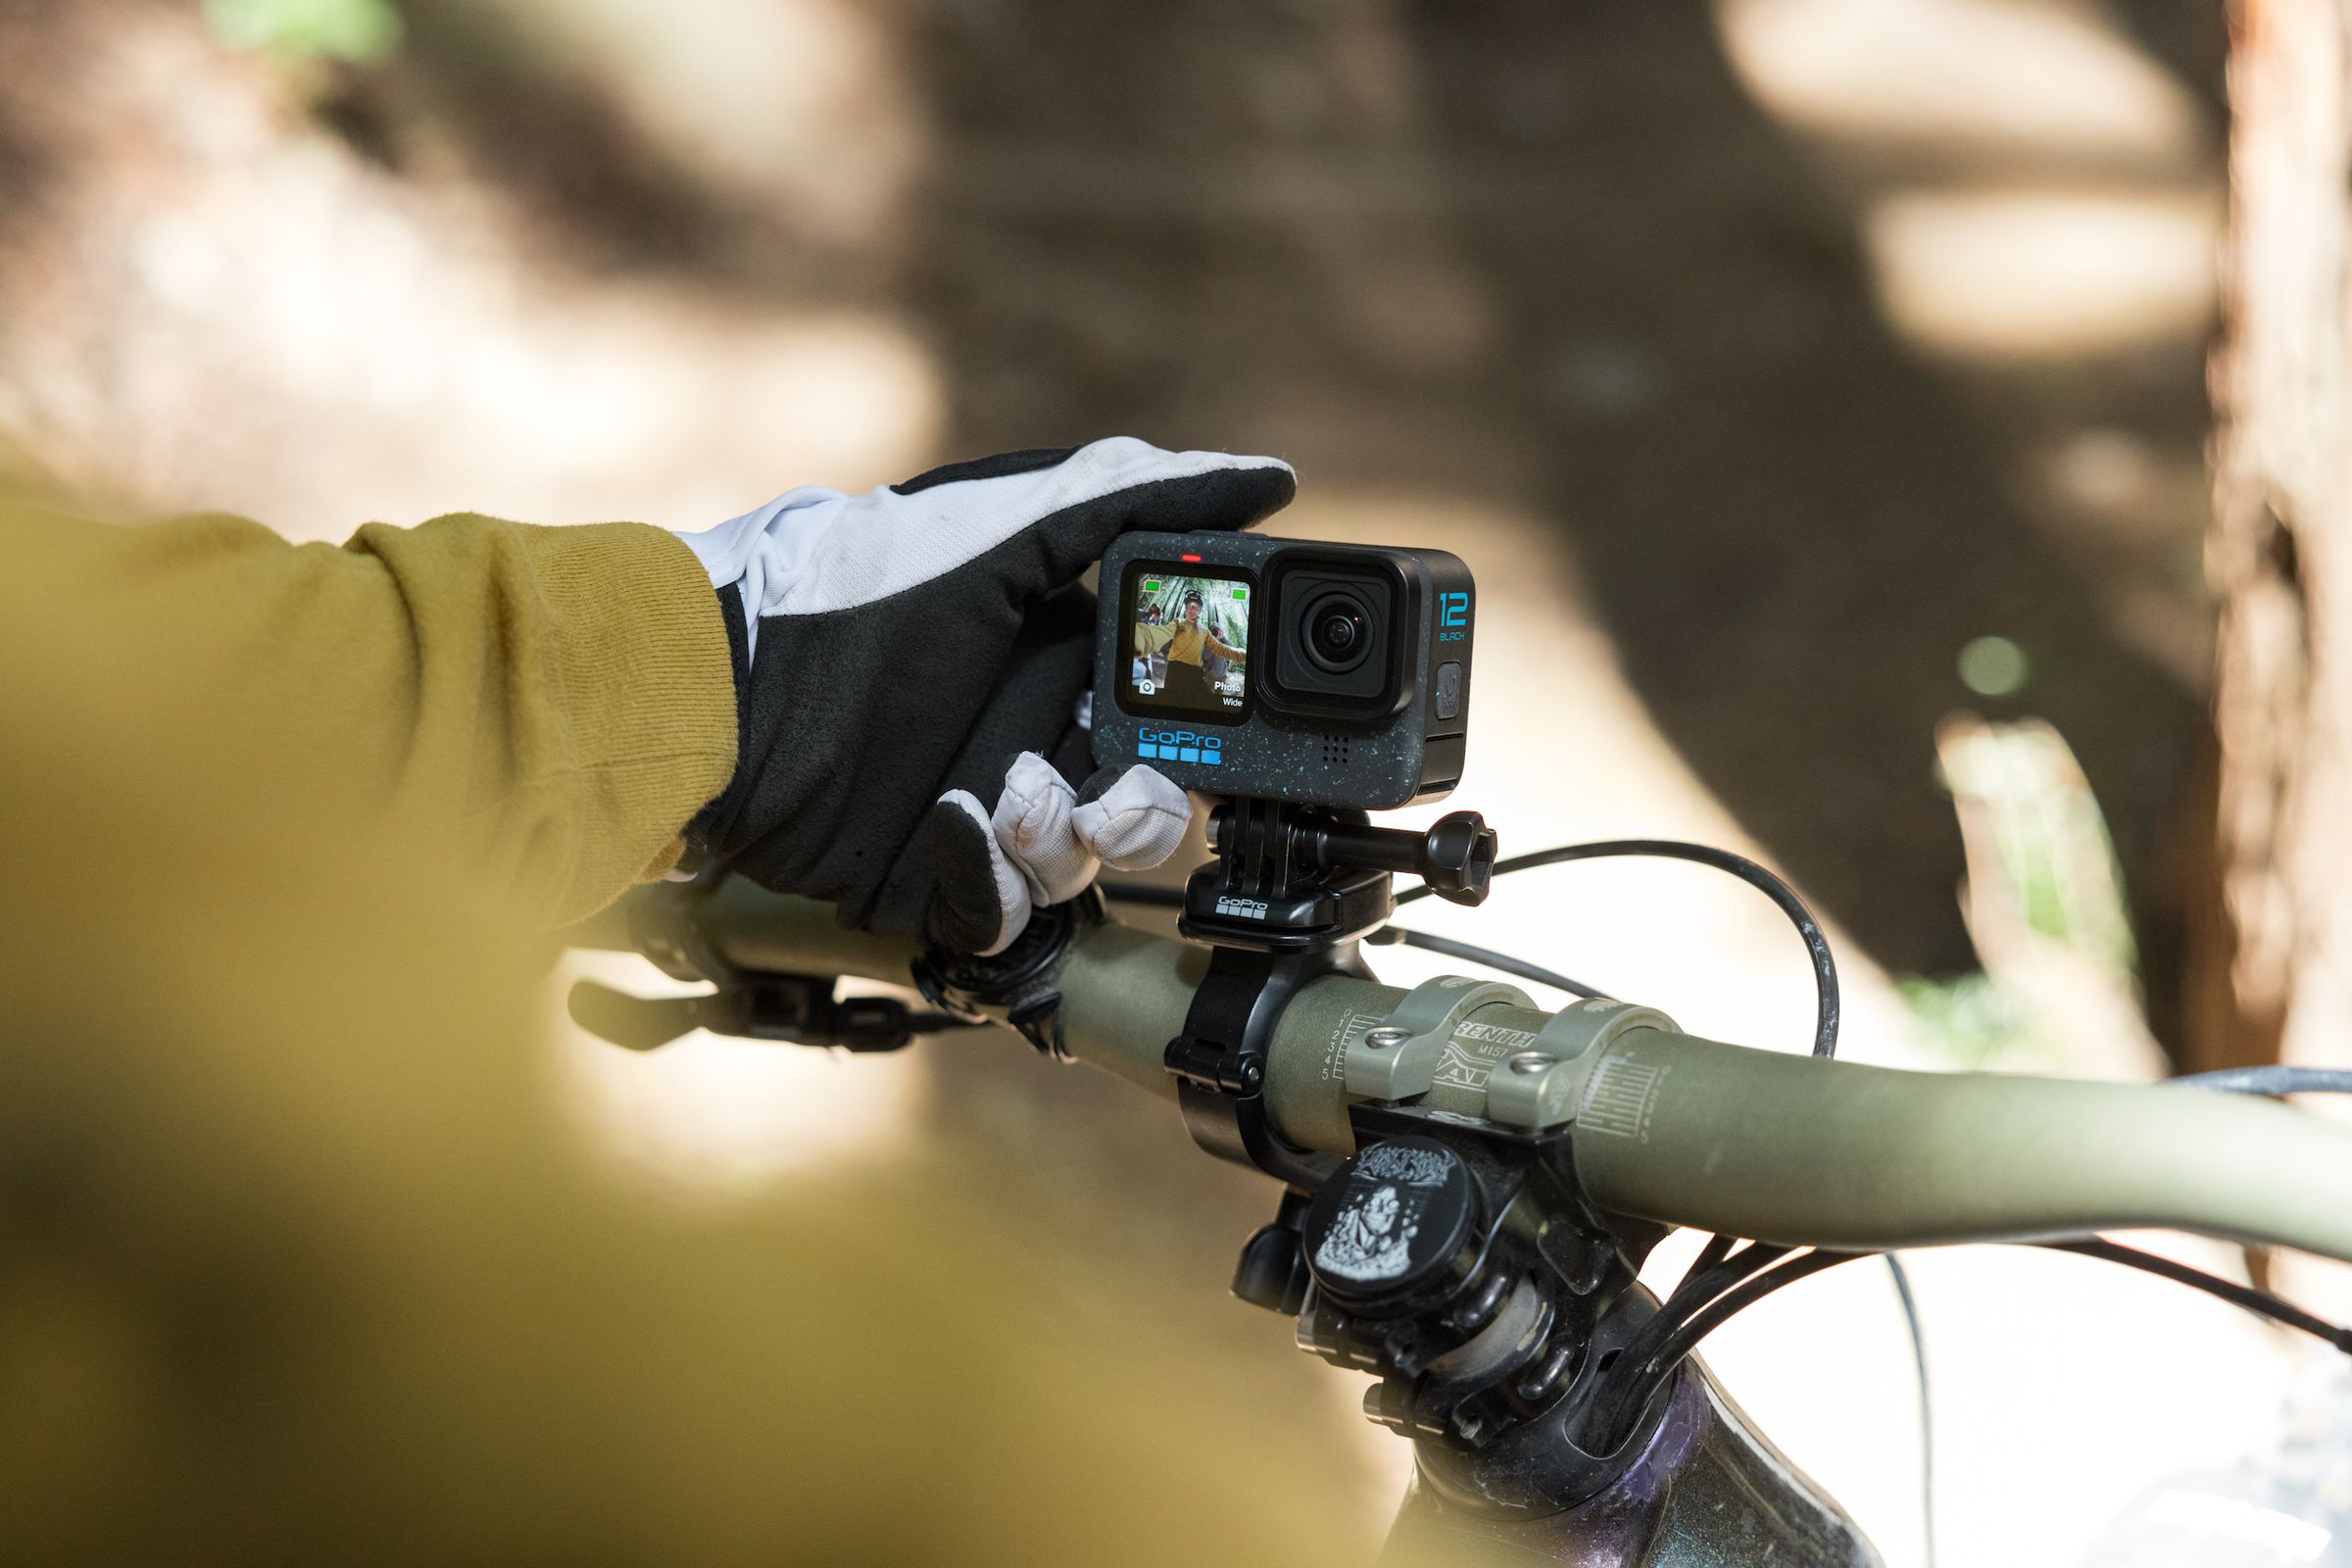 An image of a GoPro Hero 12 Black on a bike.